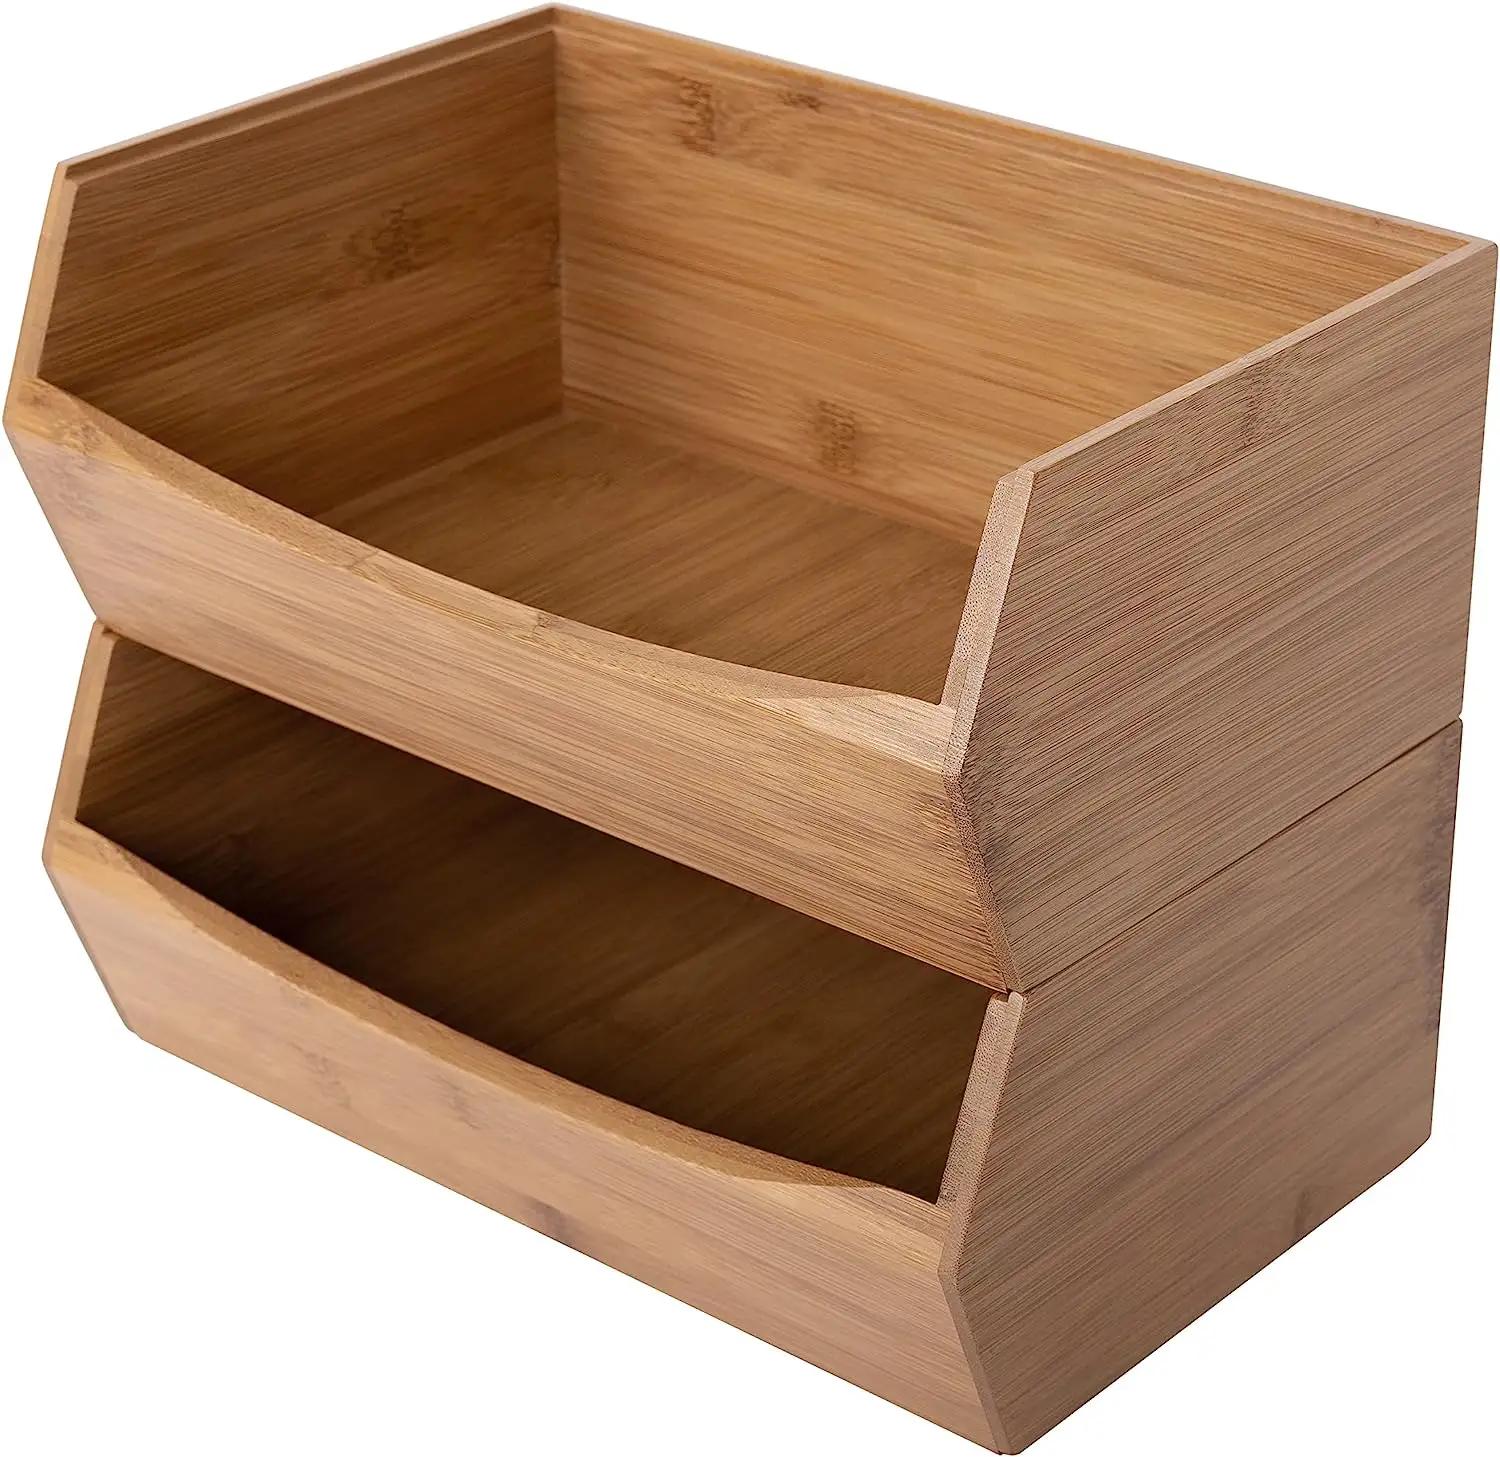 Household Items Bamboo Storage Boxes & Bins Organizer Counter Fruit Basket Stackable Bamboo Bins Kitchen Items for the Home